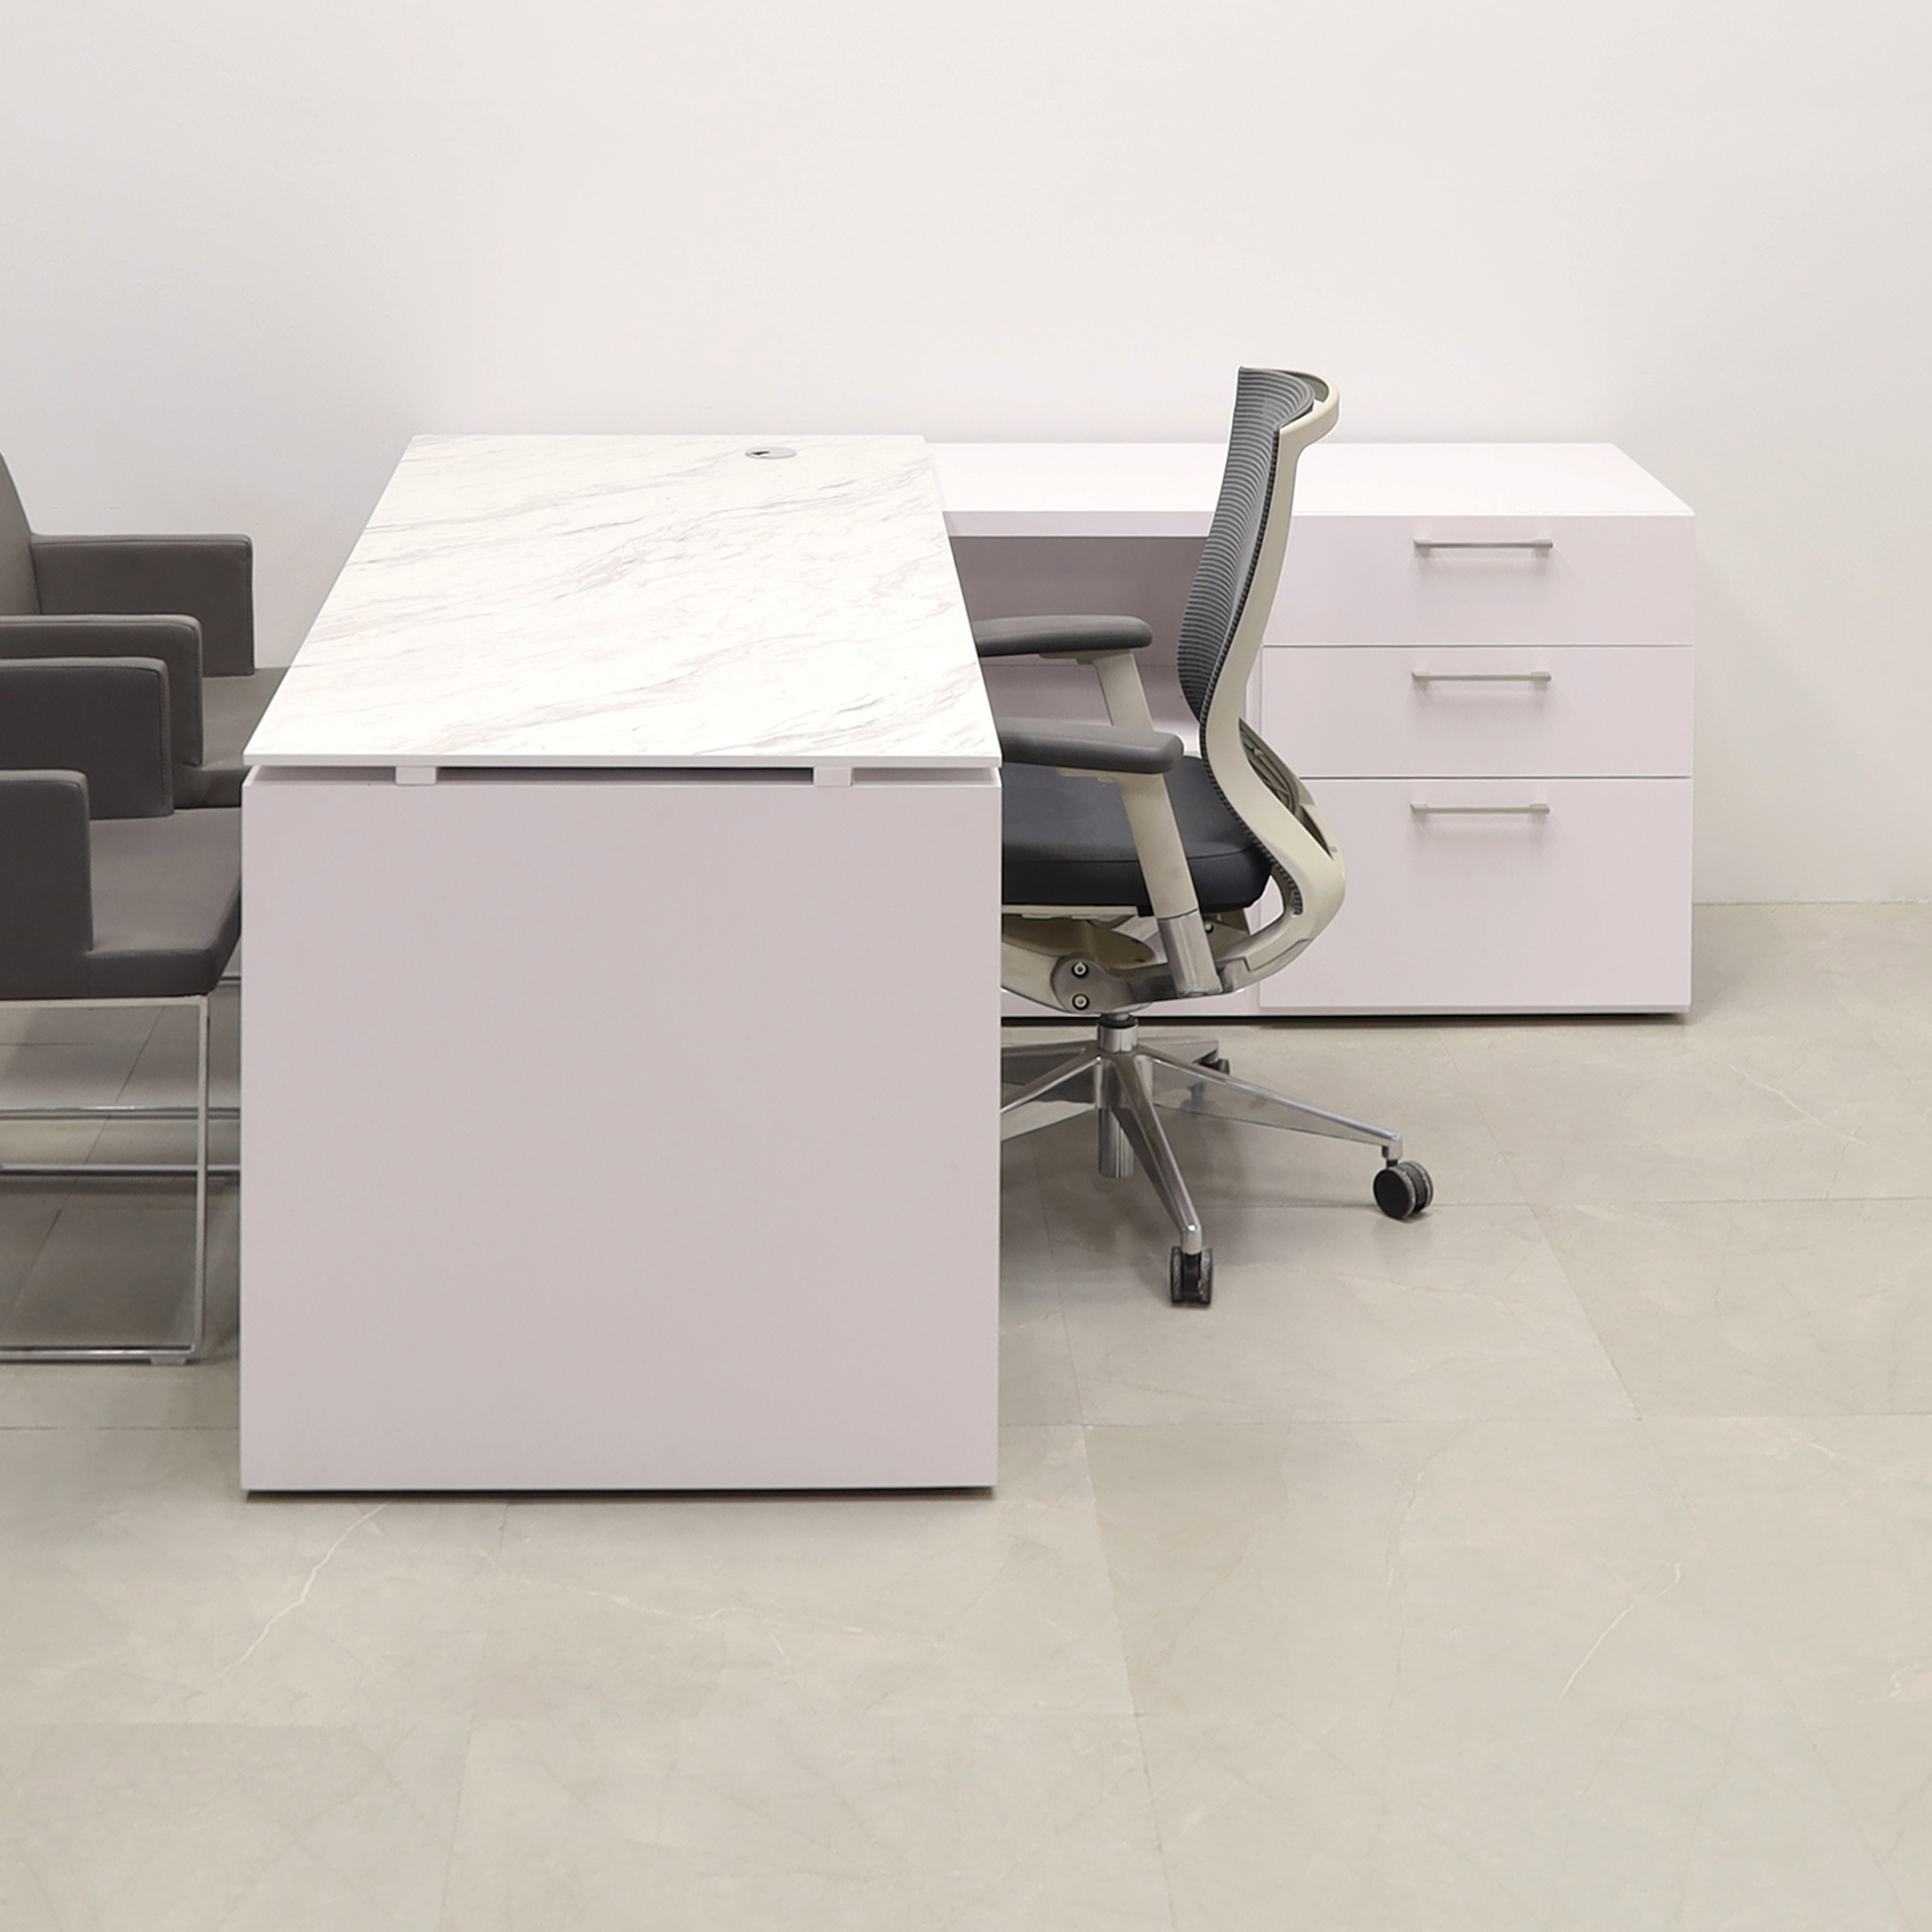 72 inches Calcutta Blanc Engineered Stone Top and White Matte Laminate base and credenza, with two pencil drawers, one file cabinet and one shlef shown here.